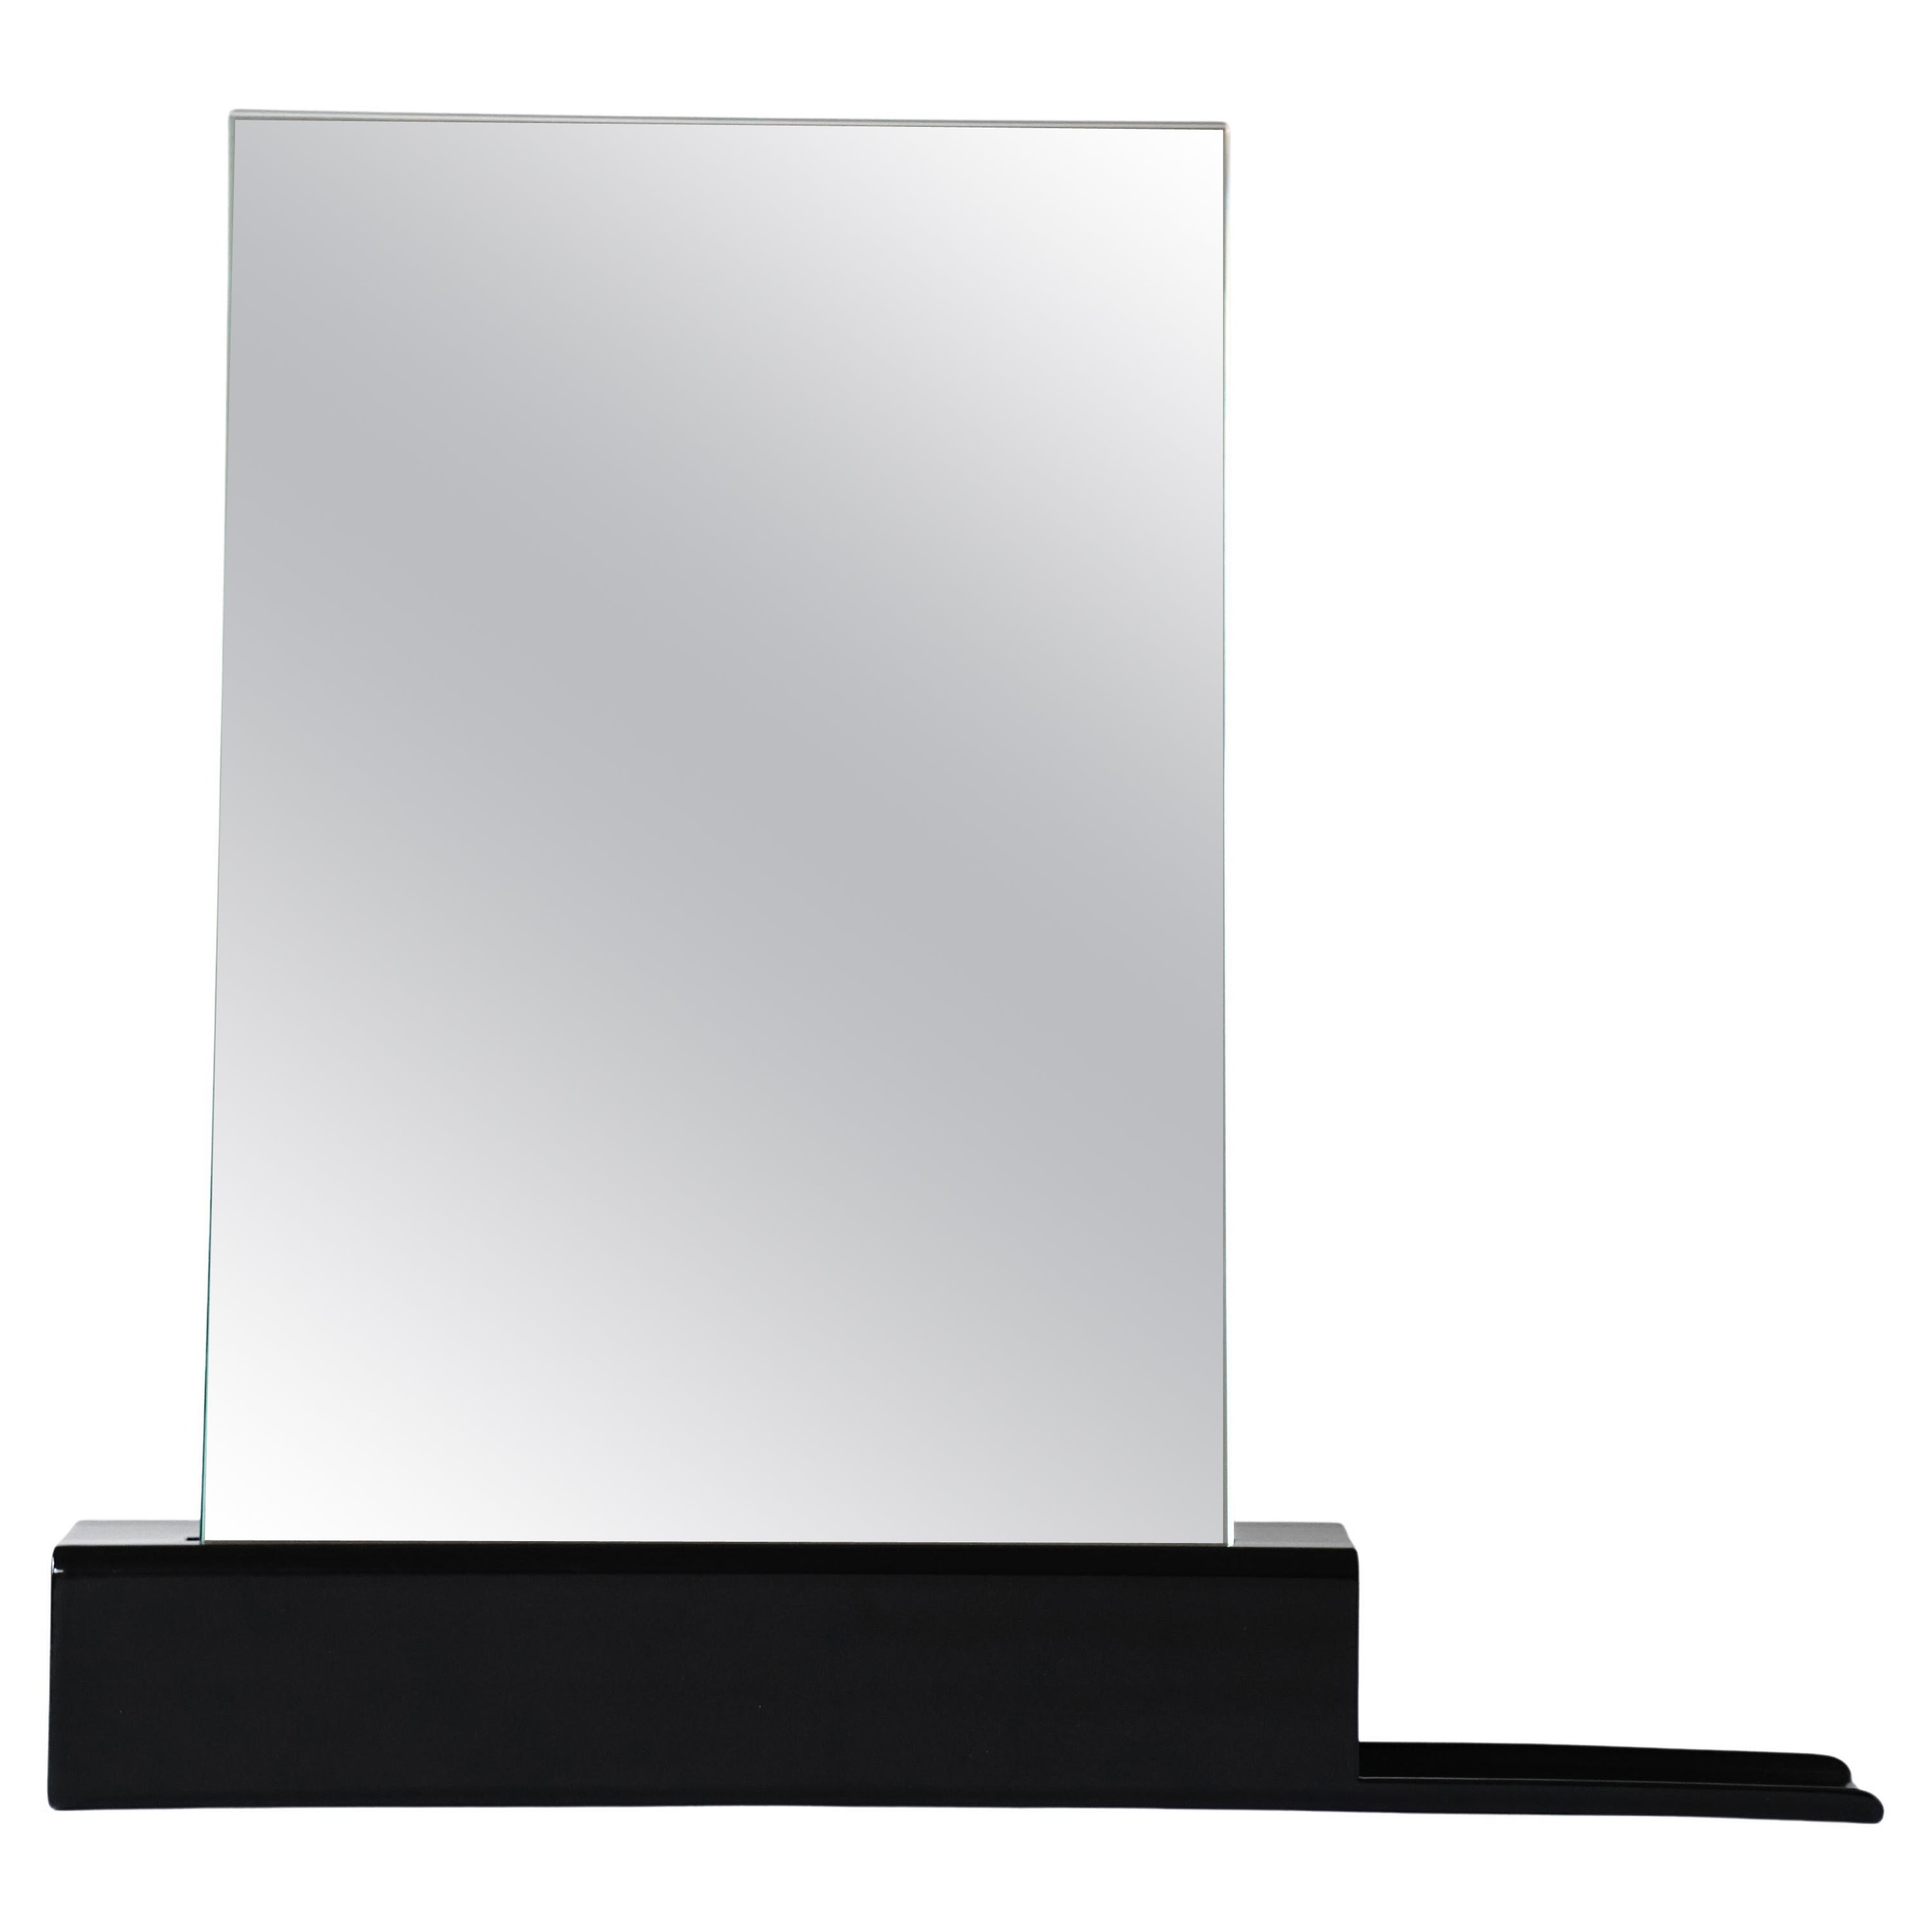 The M1 (Mirror 1) is a line of mirrors designed by Harm de Veer. This industrial yet elegant Dutch design is available in various versions, colours and sizes. Alone or in combination with other M1's, you can make a statement out of functionality.